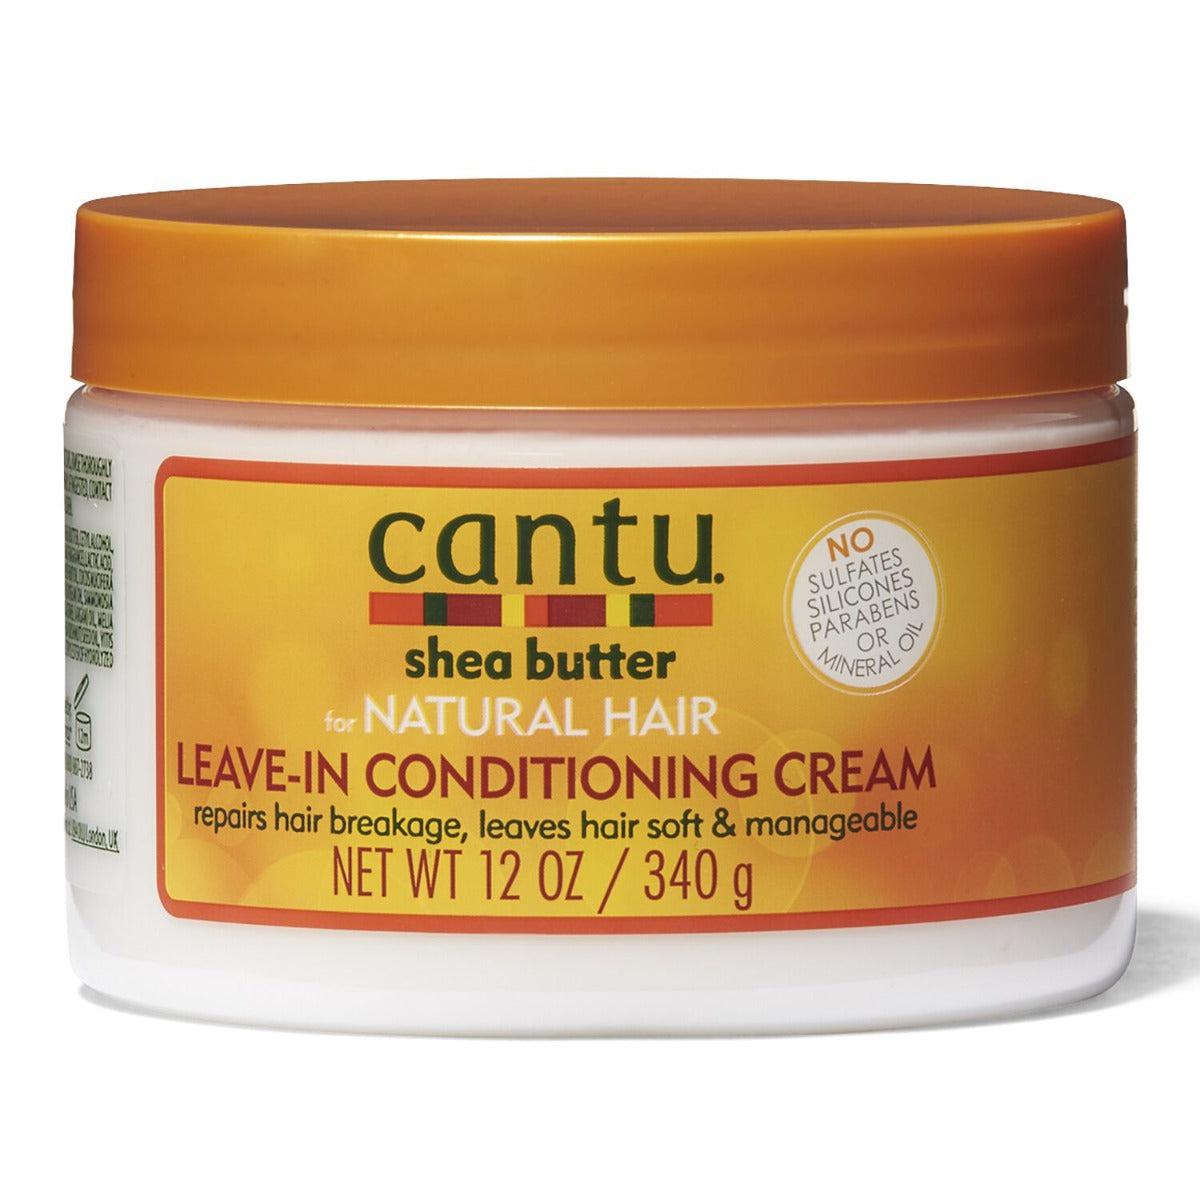 Cantu Shea Butter for Natural Hair Leave in Conditioning Cream 340g